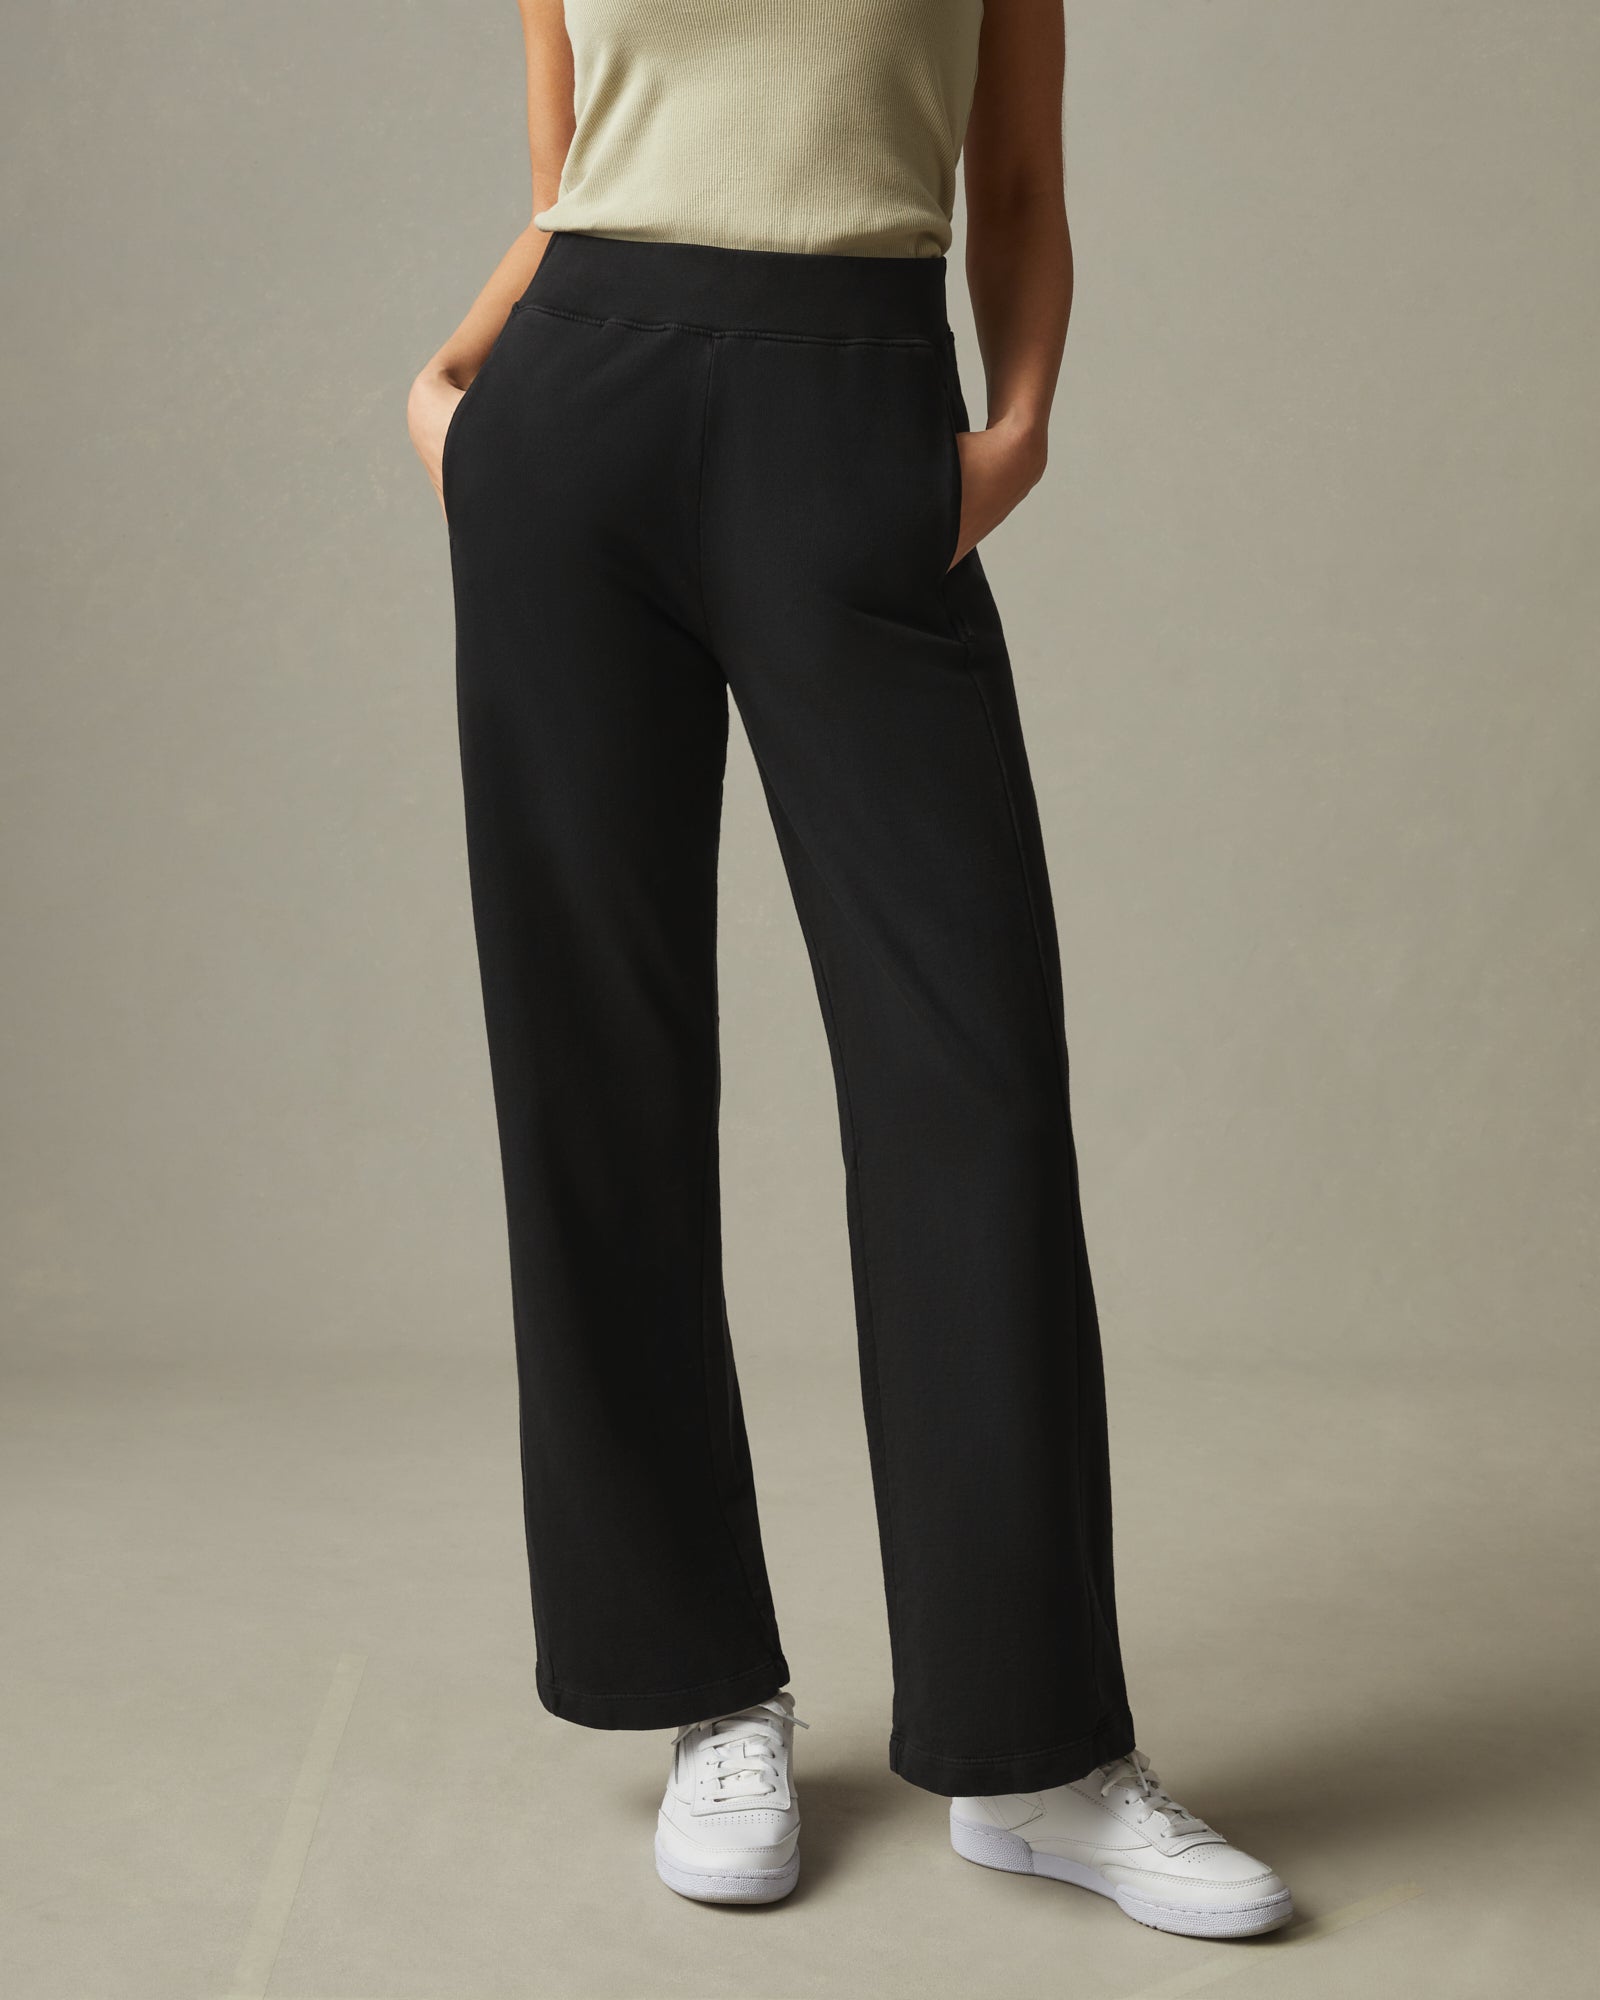 Page 5 - Women's Joggers, Straight & Wide Leg Tracksuit Bottoms